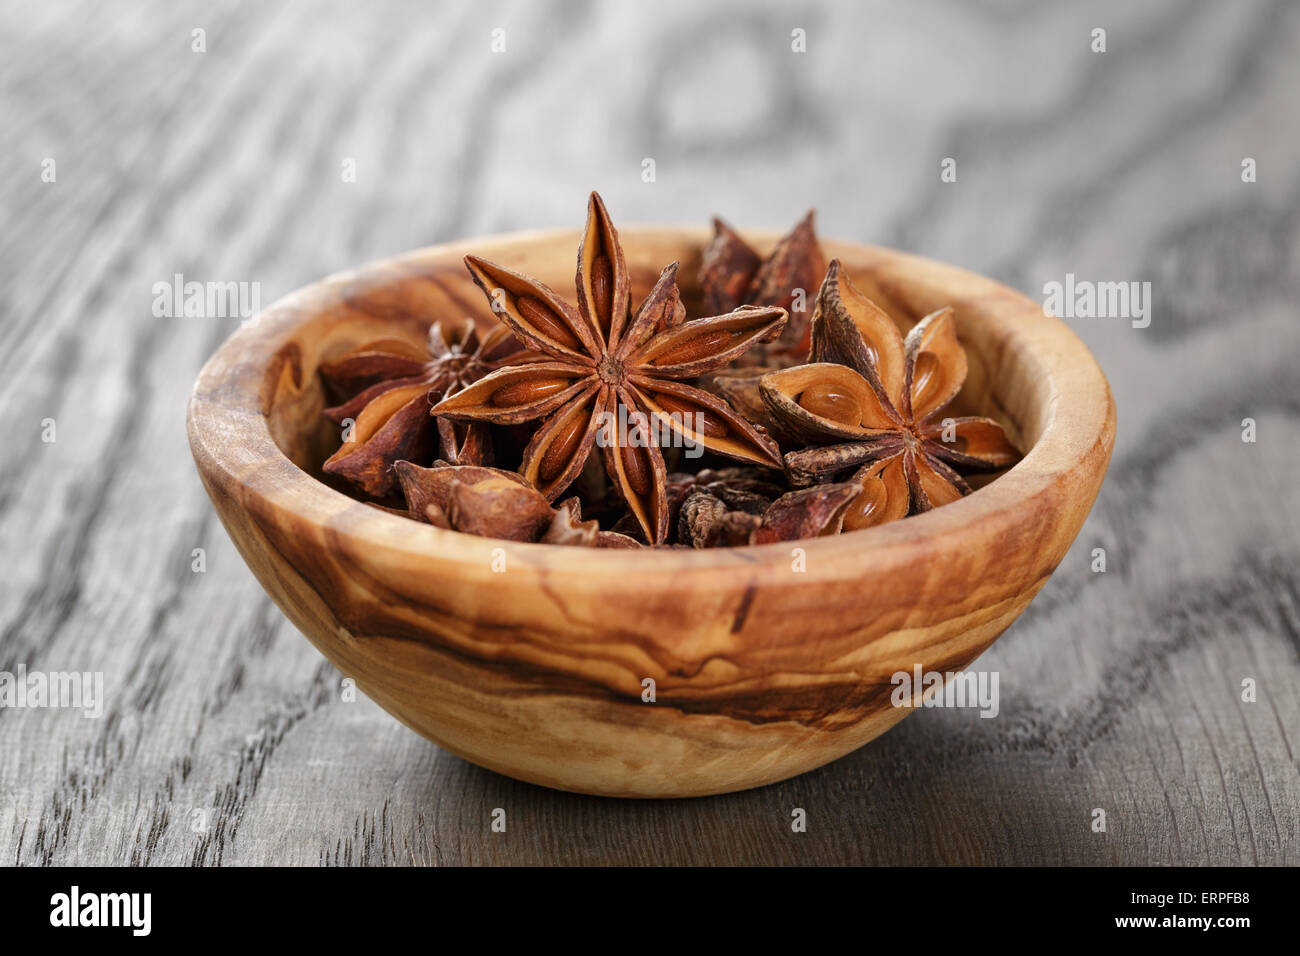 anise stars in bowl on old oak table close up photo Stock Photo